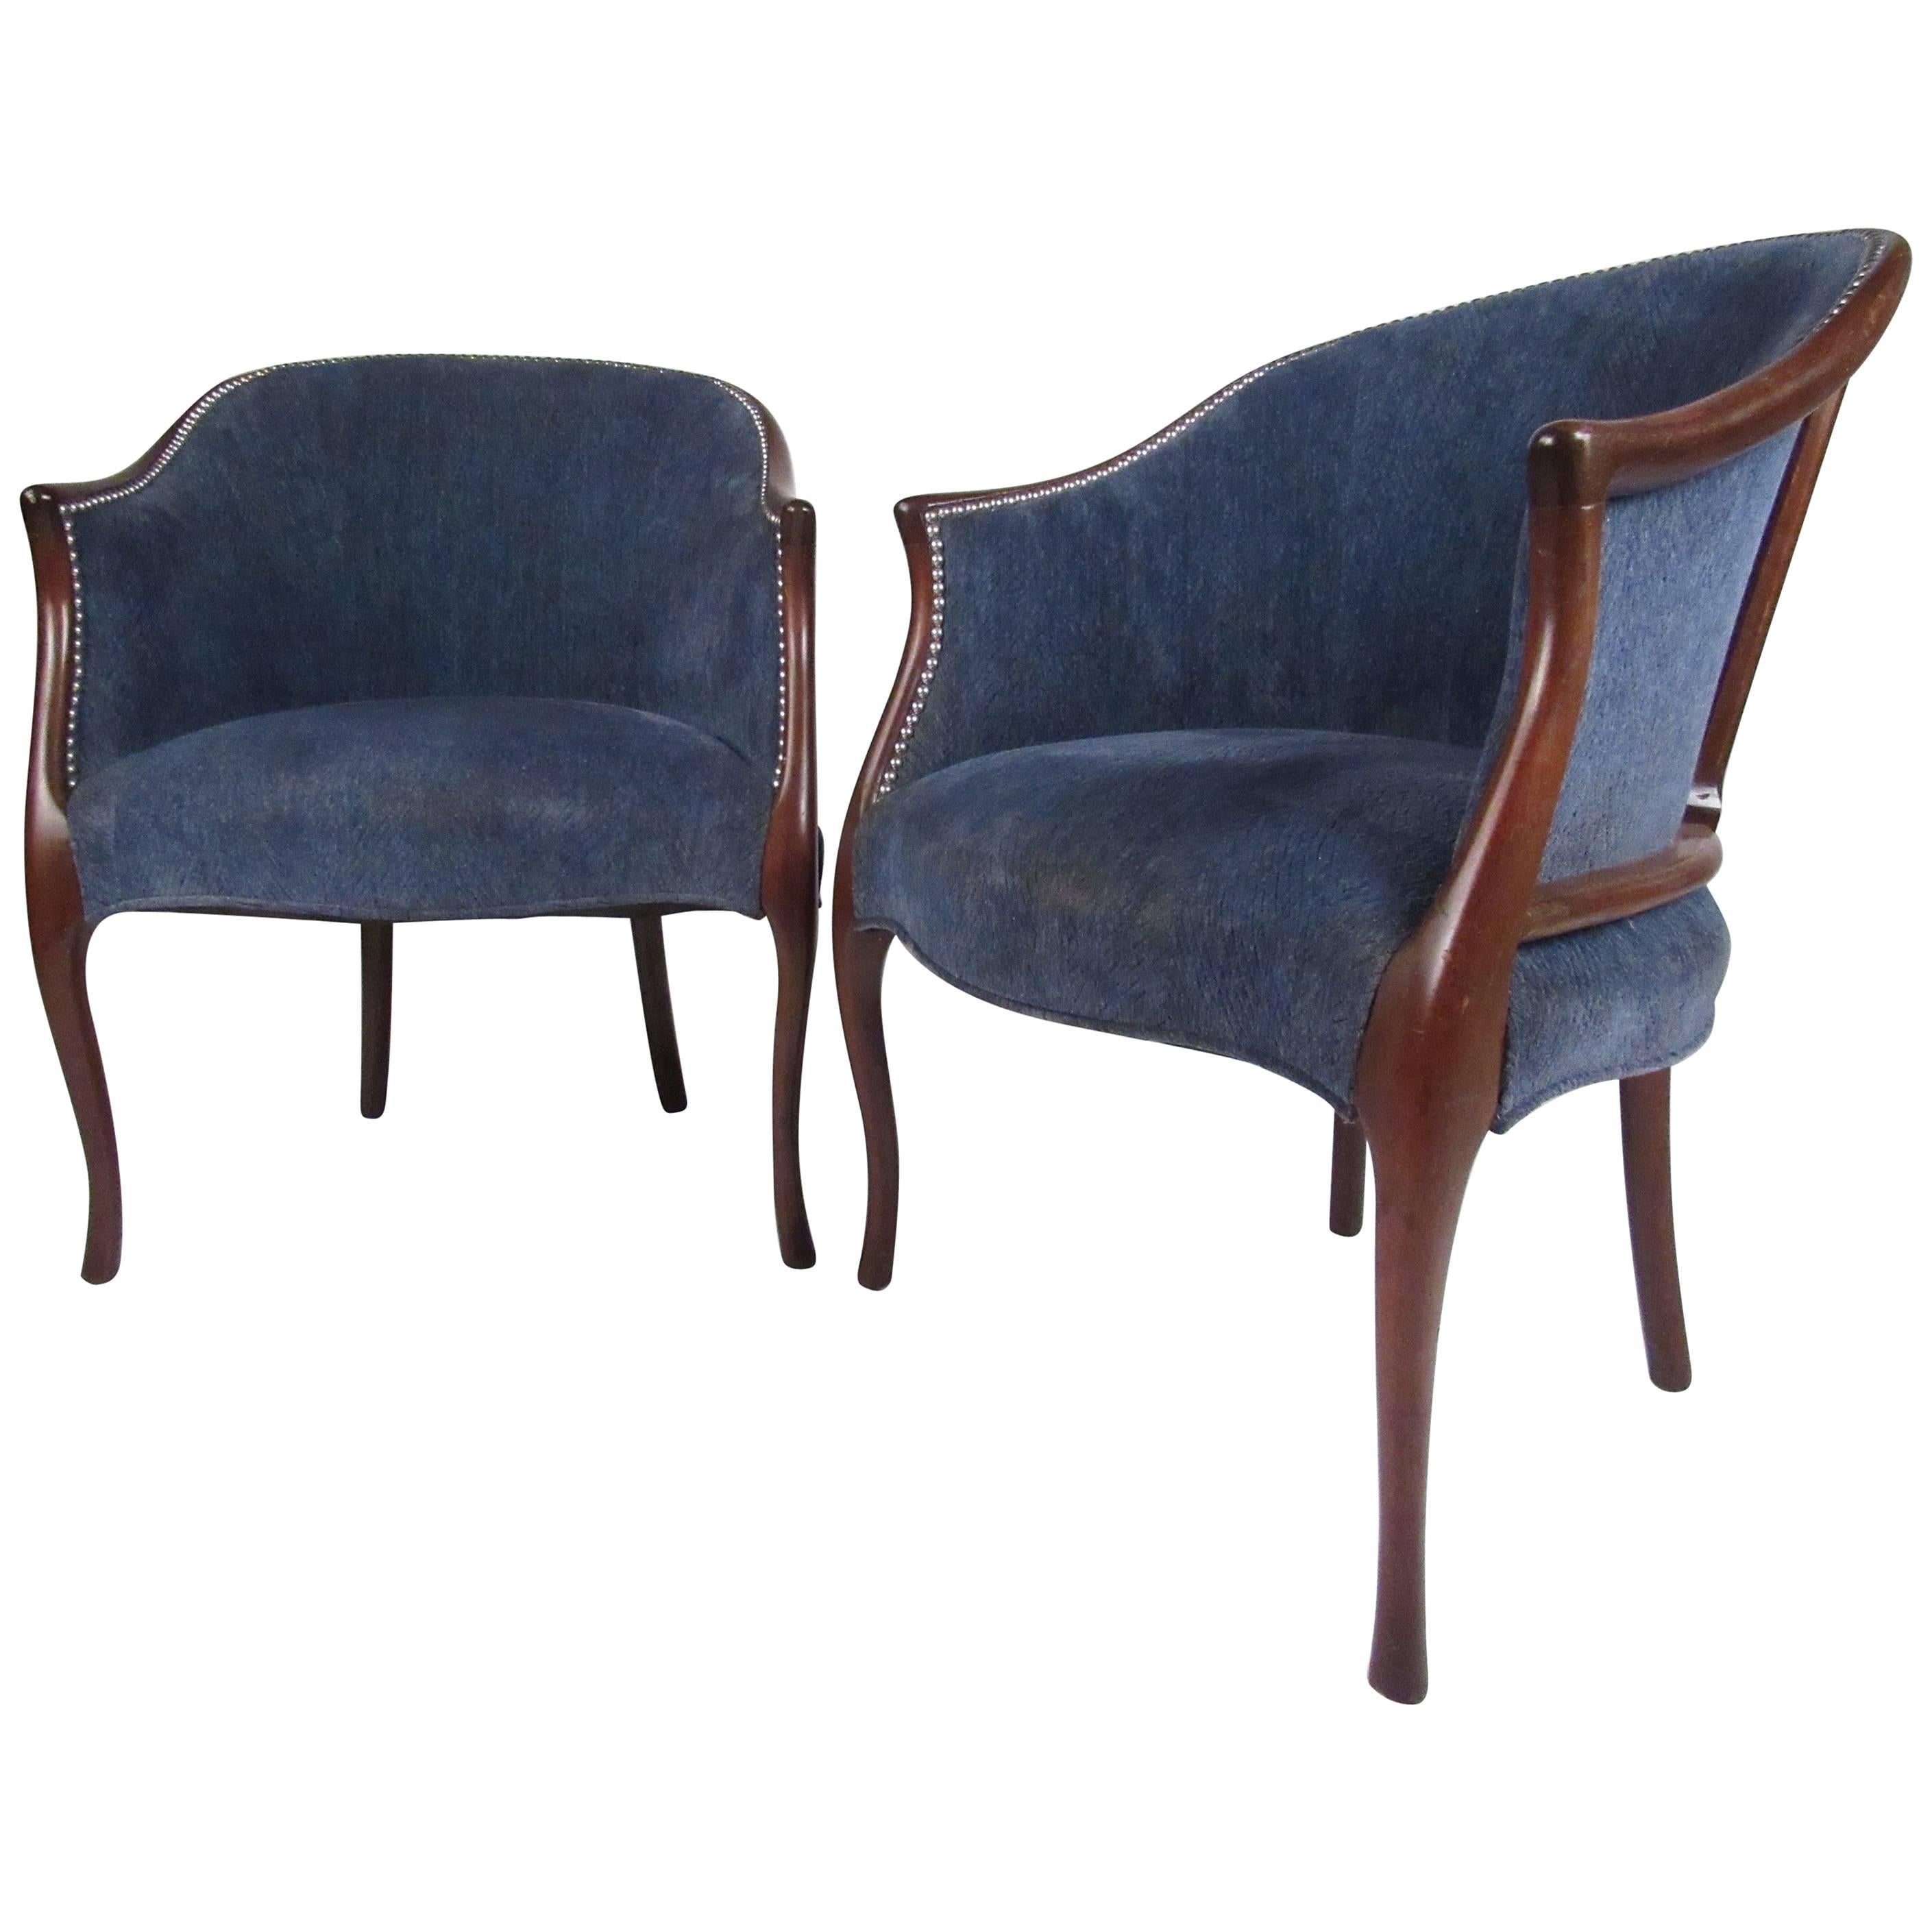 Pair of Vintage Modern Club Chairs by Hickory Chair